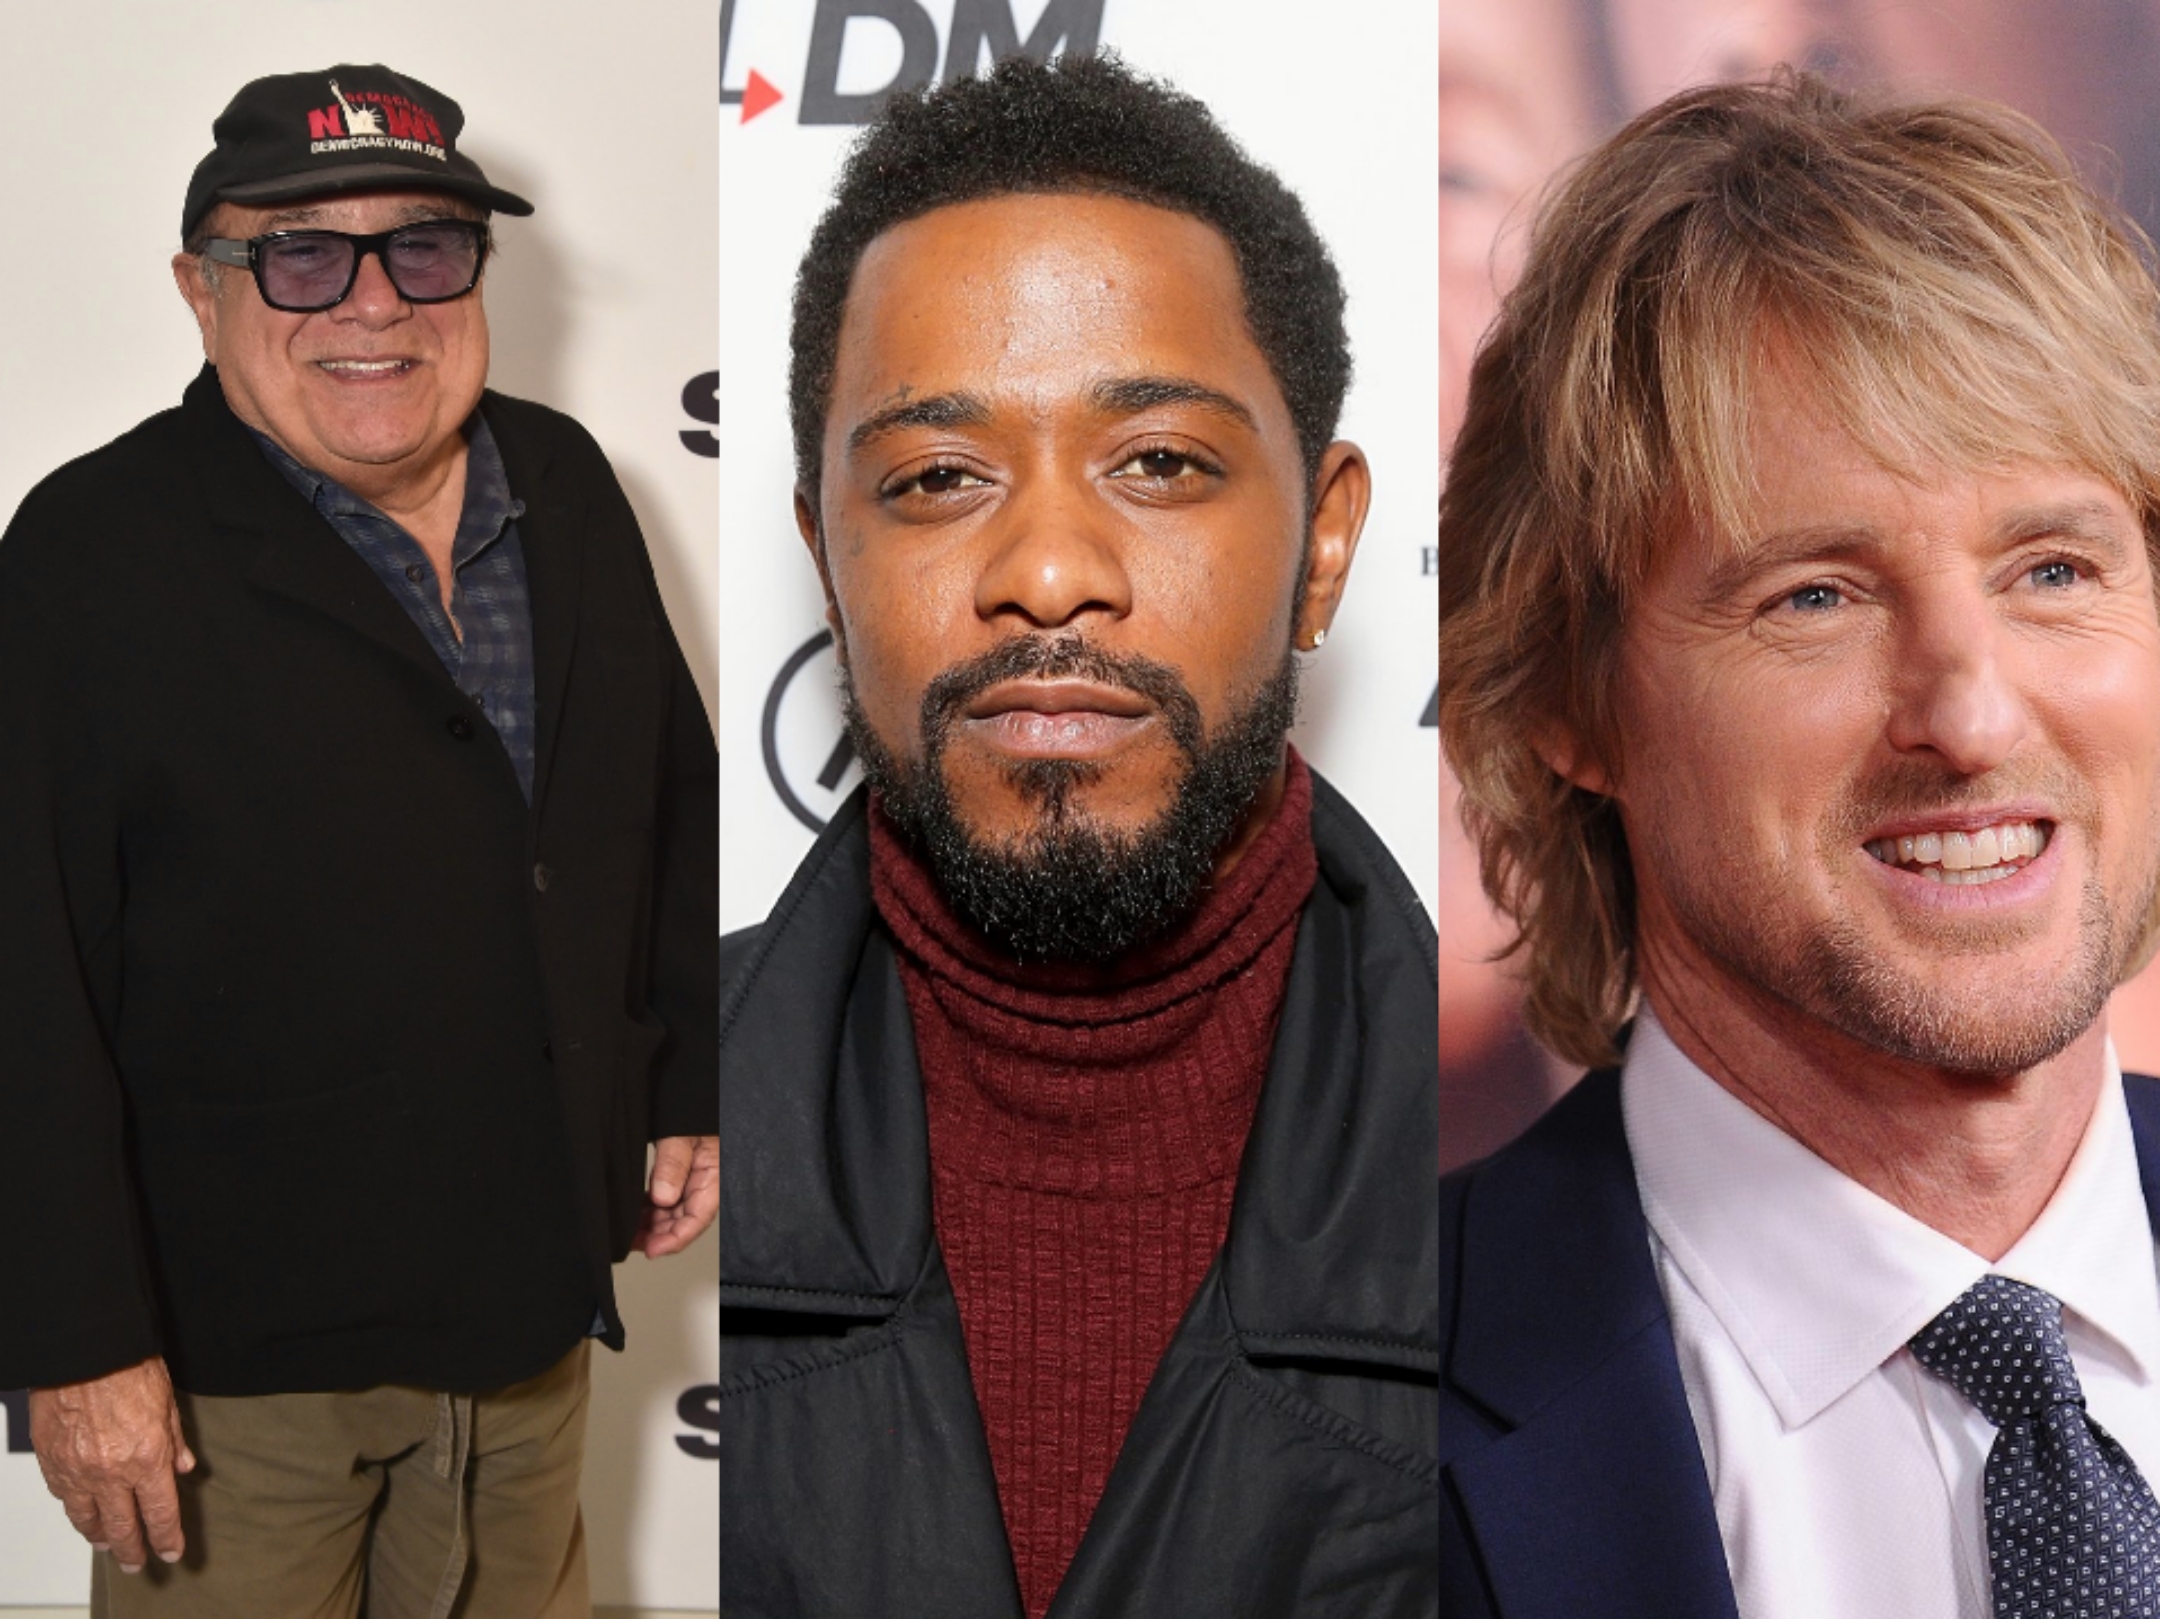 Danny DeVito, Lakeith Stanfield, and Owen Wilson